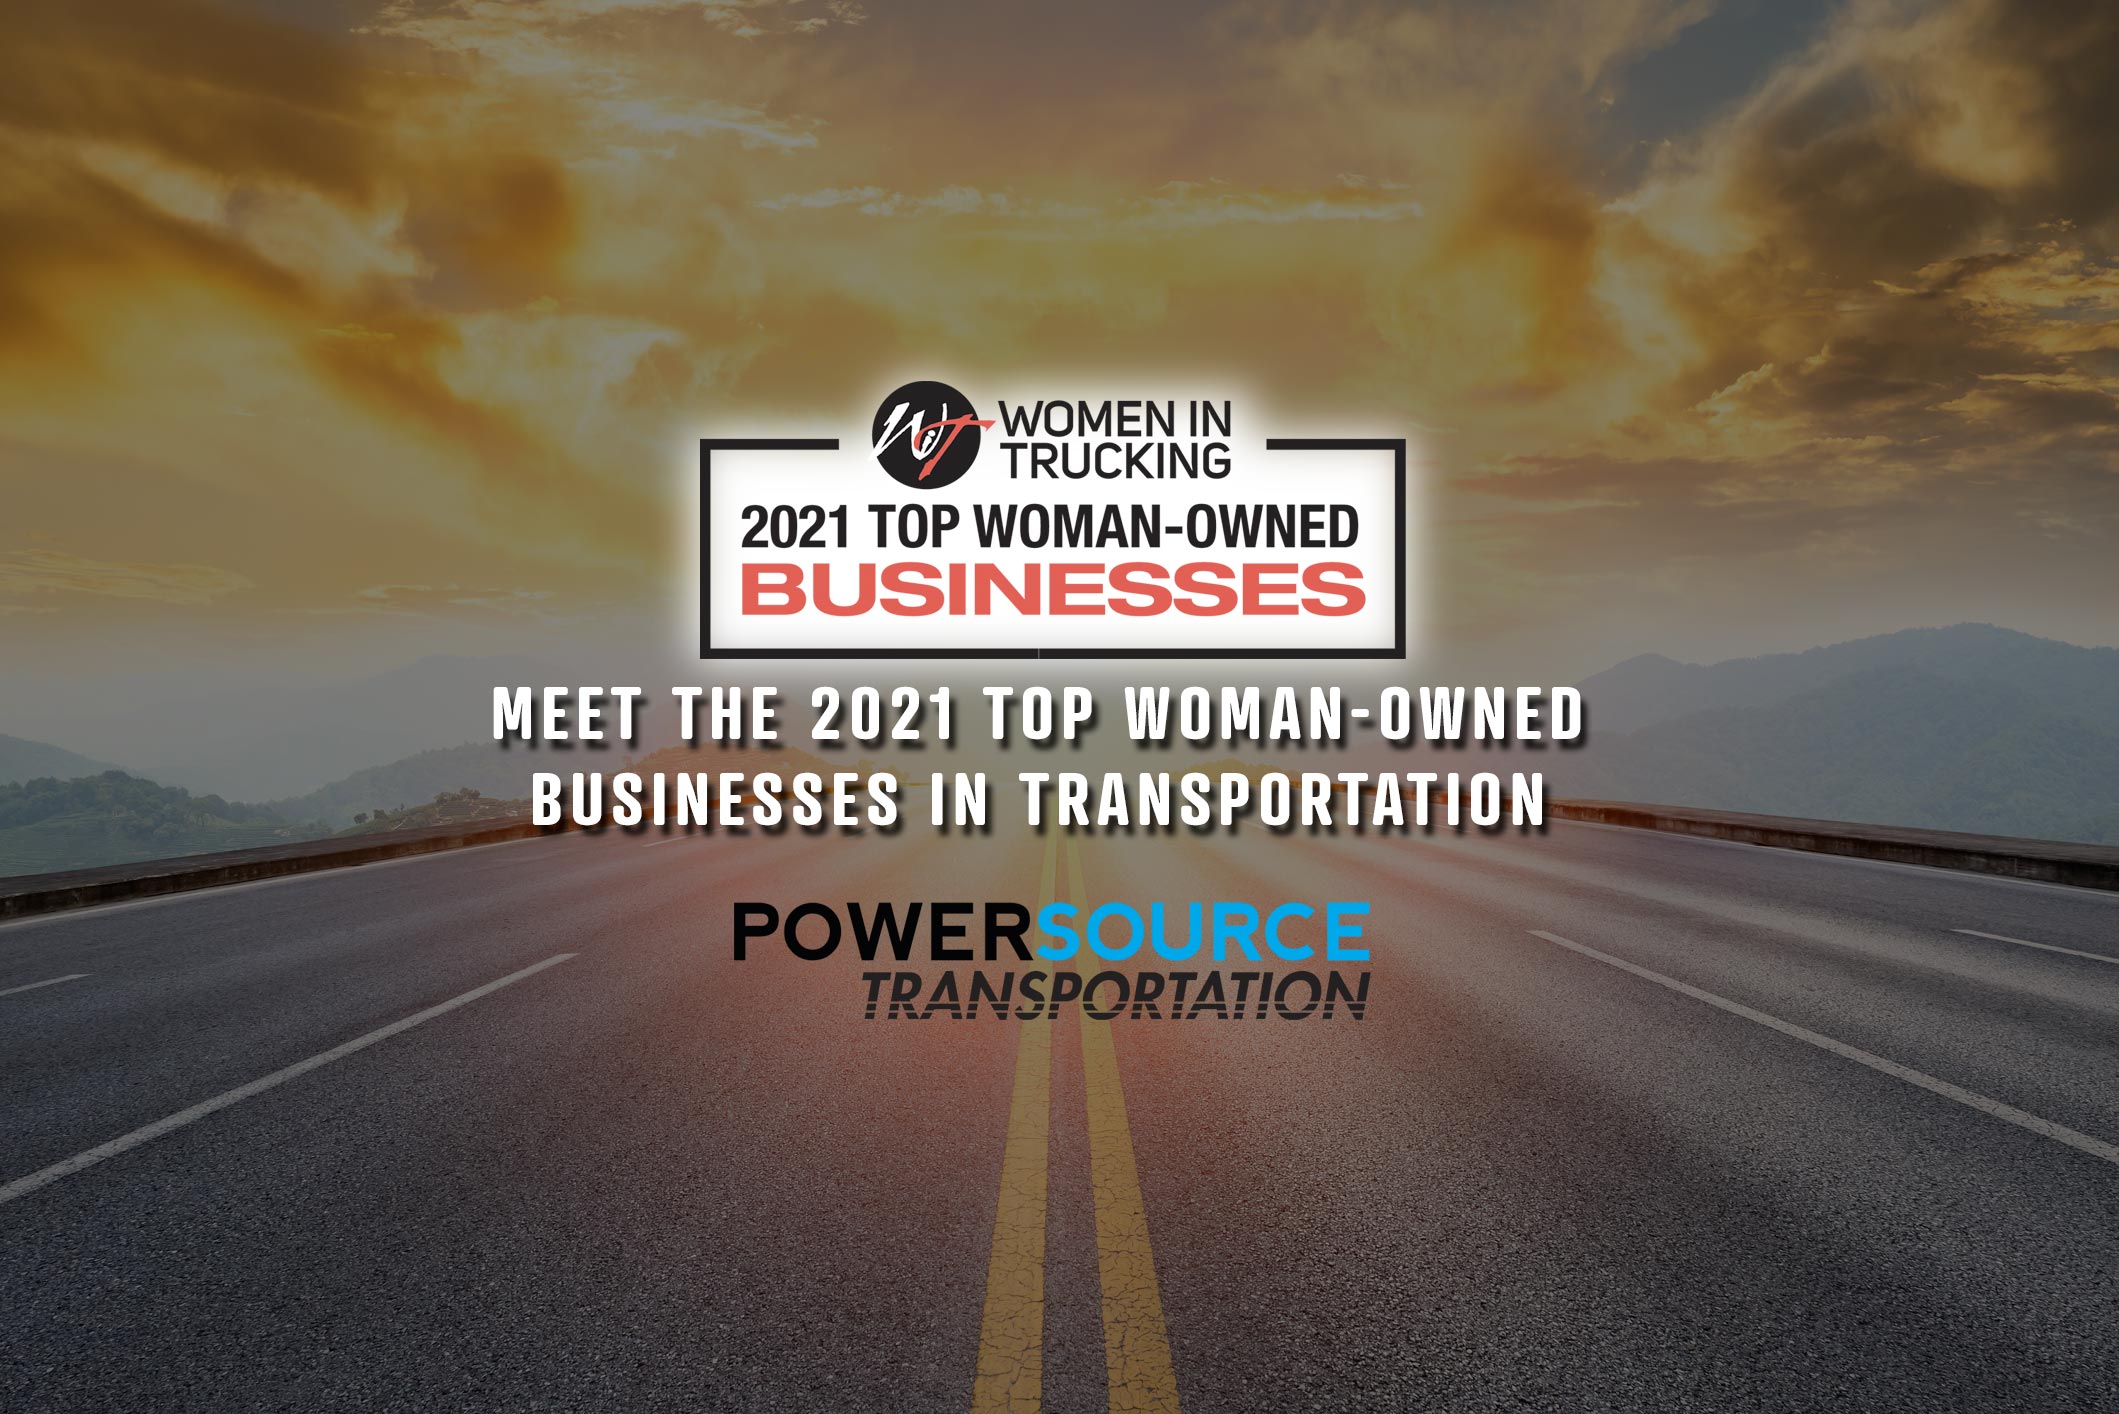 2021 Top Woman-Owned Businesses, Powersource Transportation Announcement